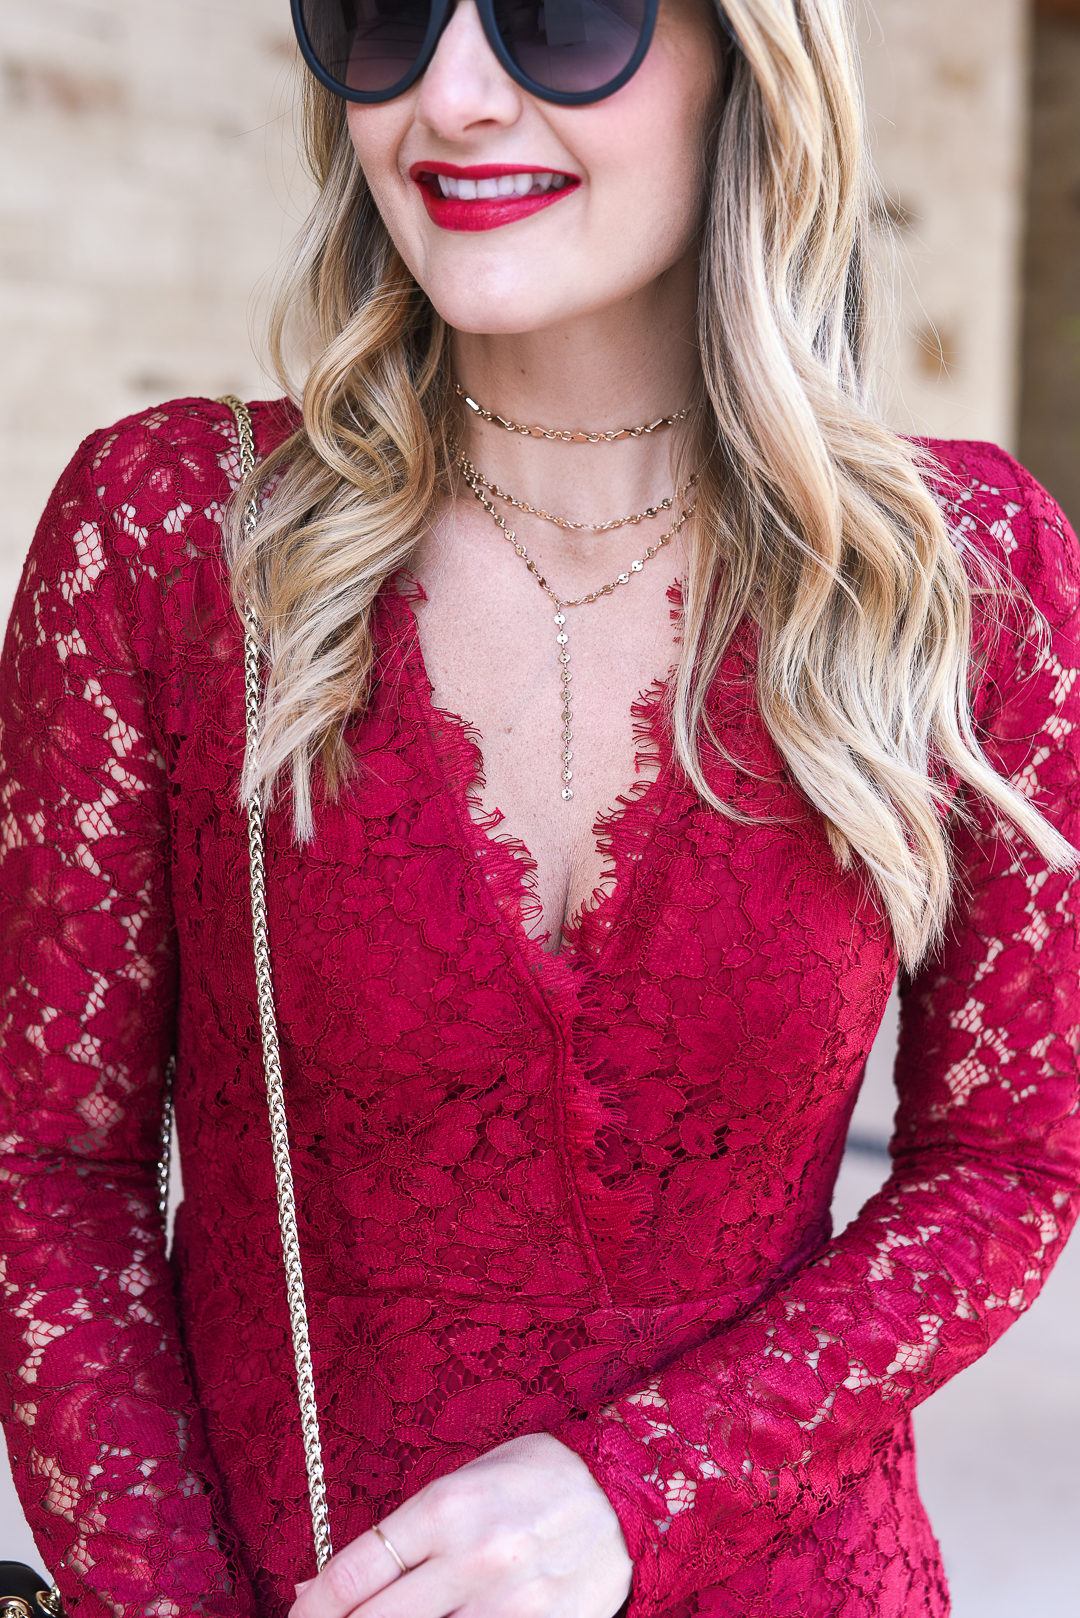 best gold layered statement necklace for under $50 - Red WAYF Dress by Chicago fashion blogger Visions of Vogue